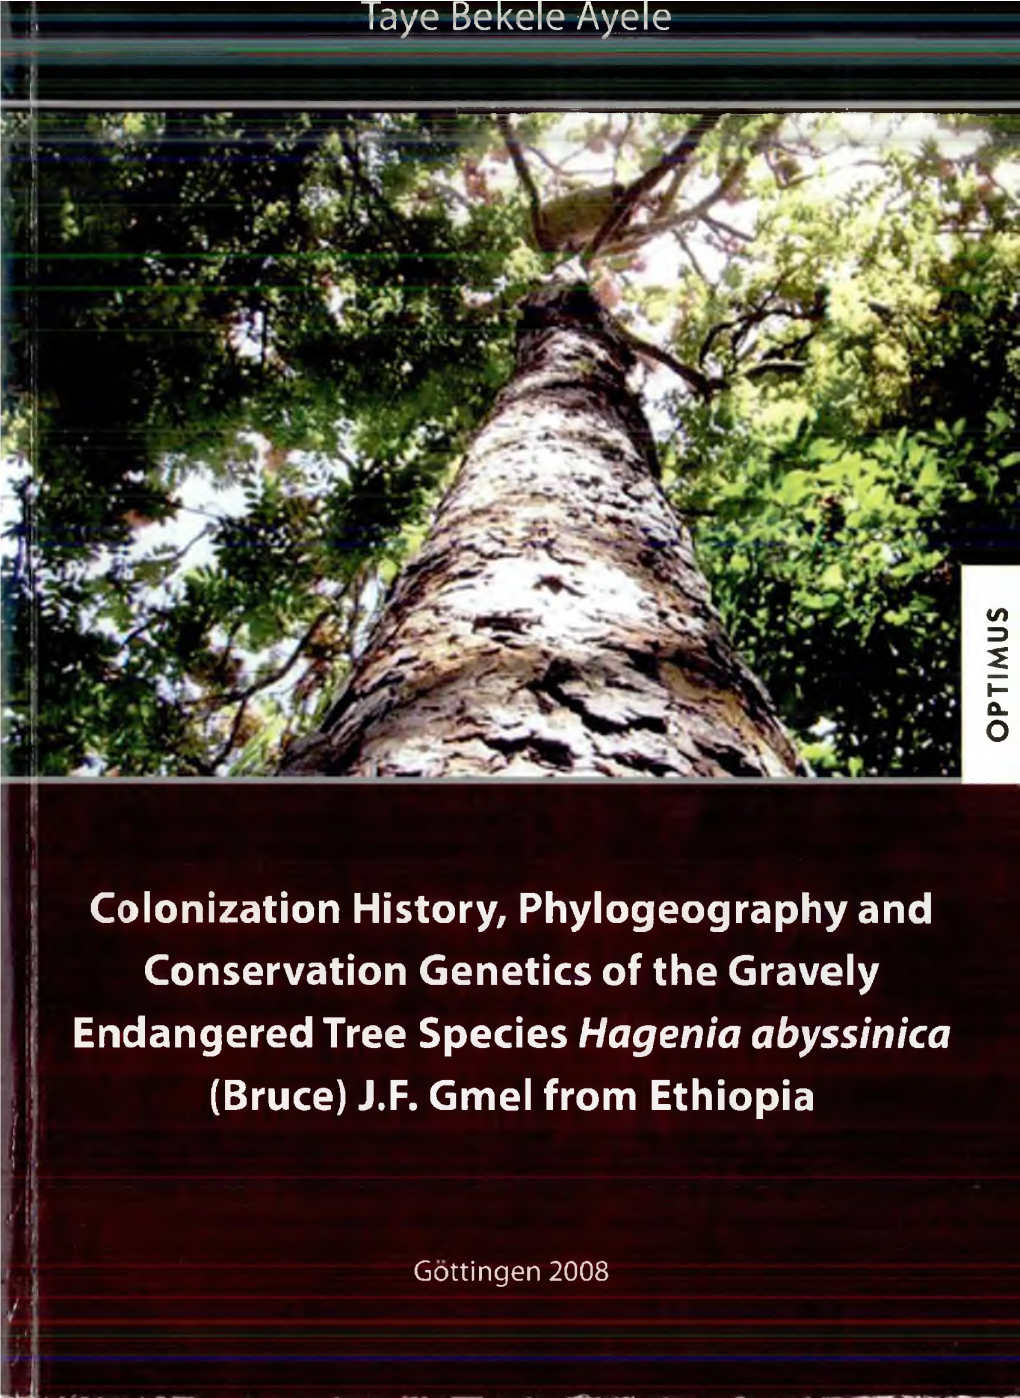 Colonization History, Phylogeography and Conservation Genetics of the Gravely Endangered Tree Species Hagenia Abyssinica (Bruce) J.F